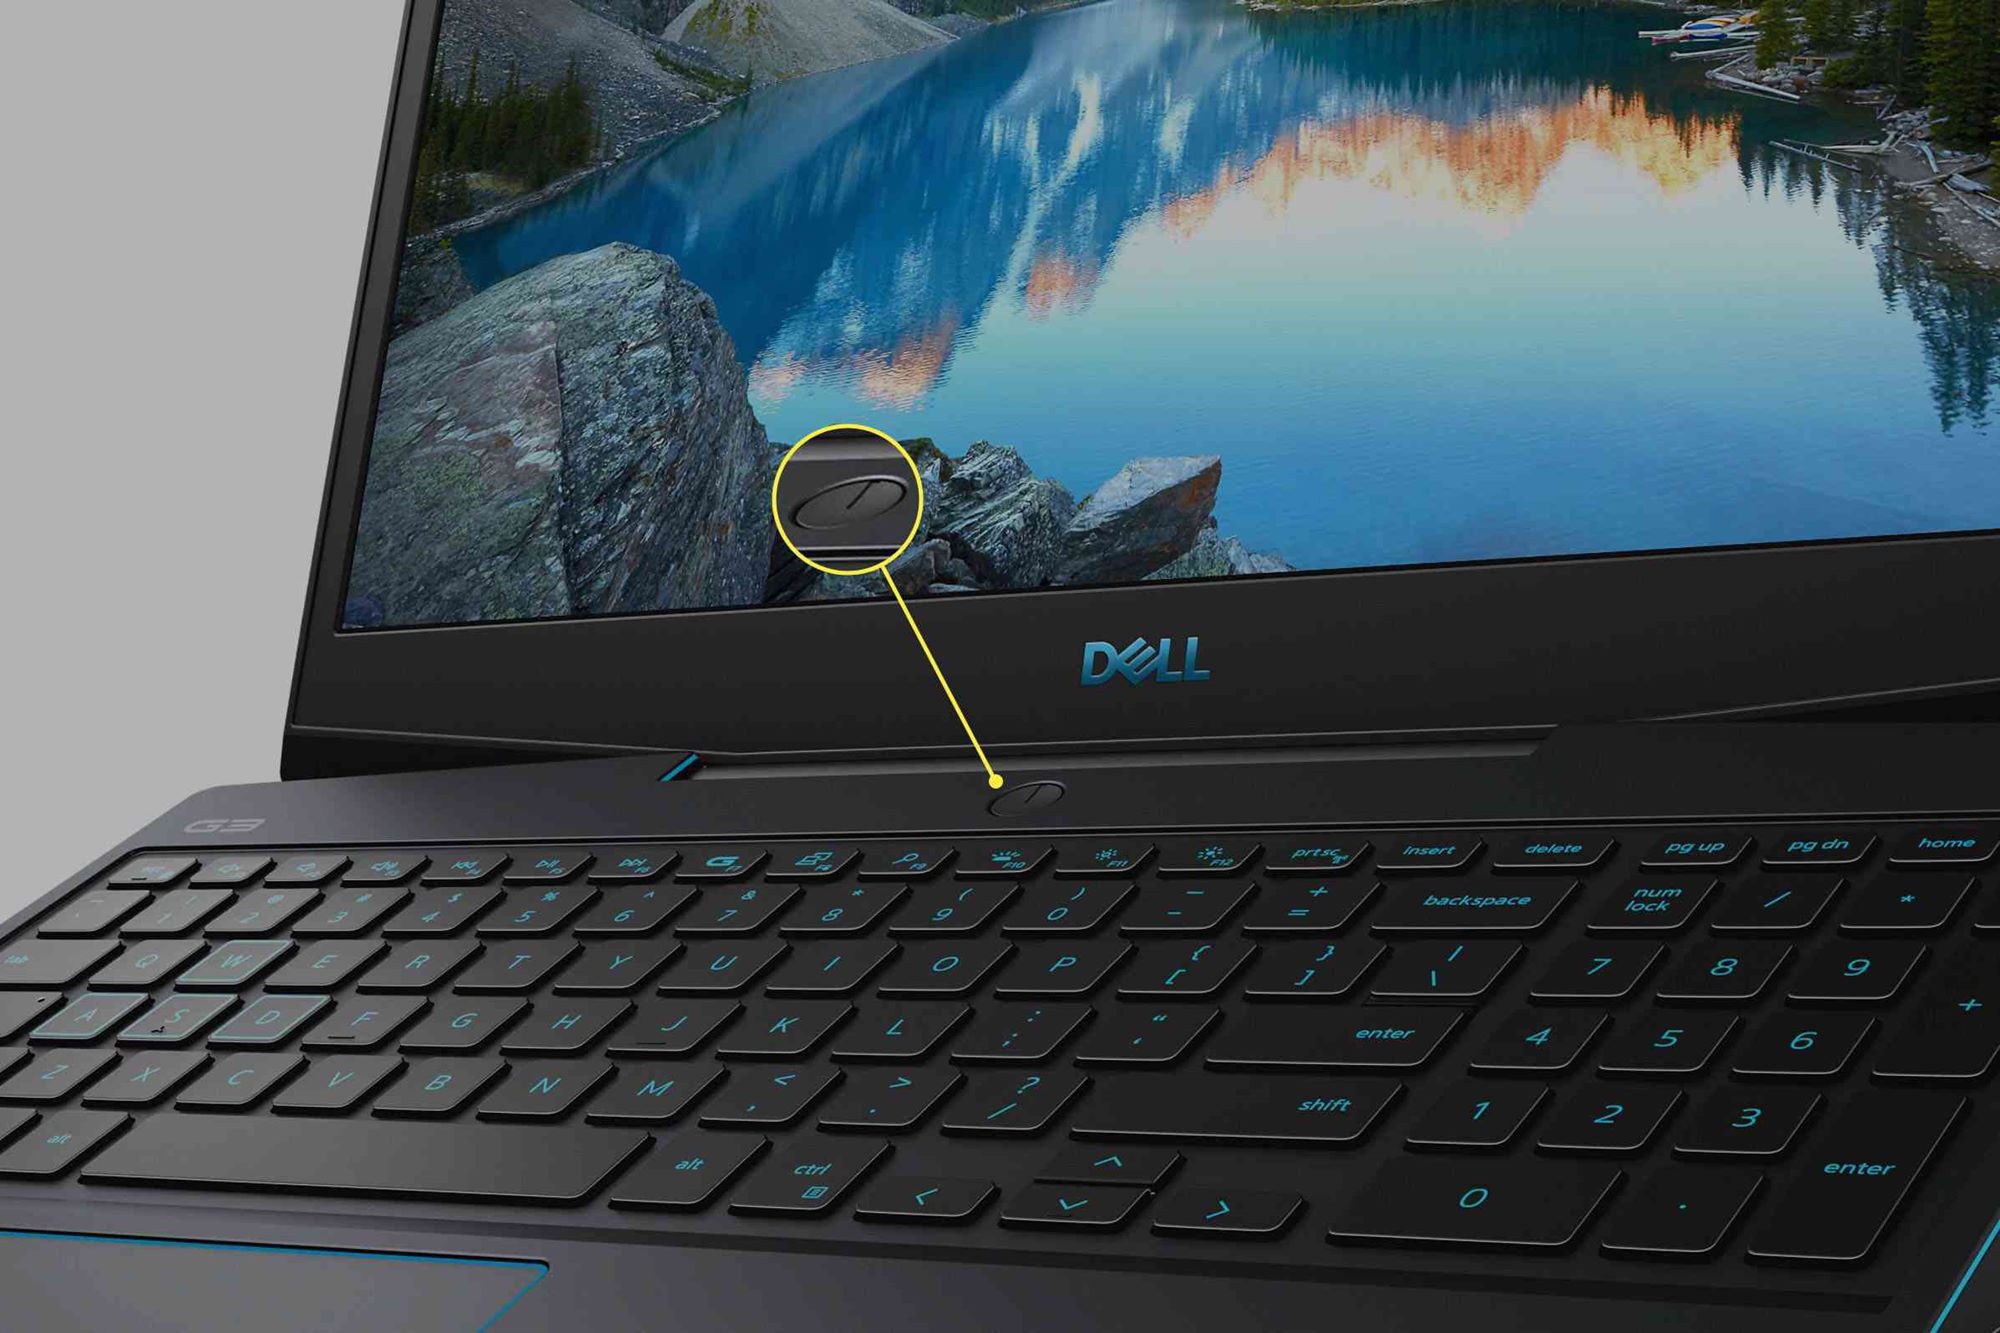 How To Turn On A Dell Laptop